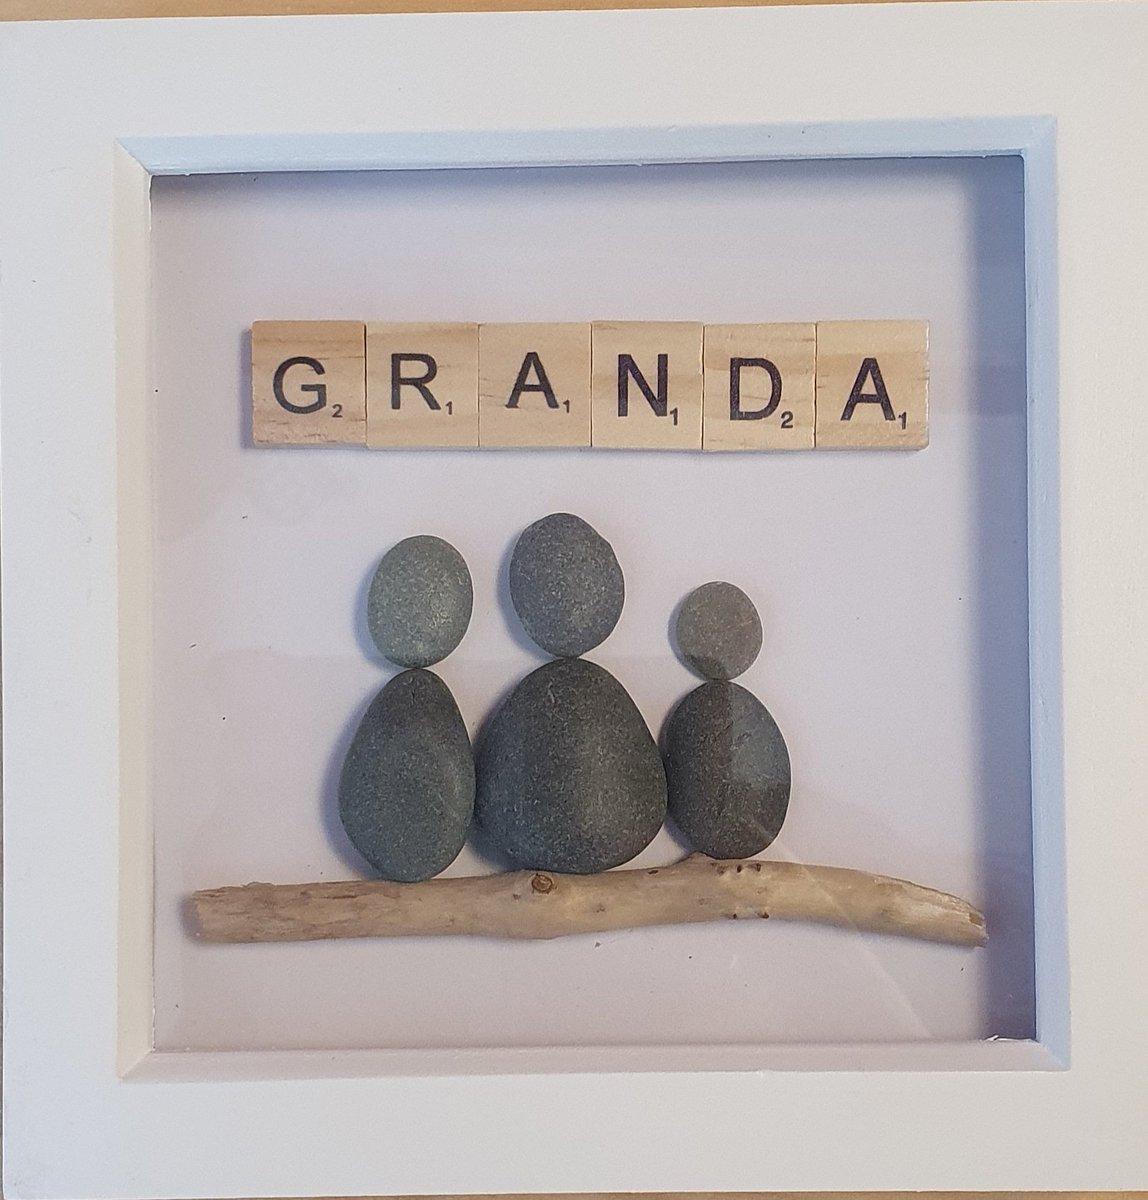 Granda frame perfect for a fathers day gift.£15
#visitdanda #arboath #beach #beachcraft #pebbleart #scrabbletiles #frames #dundee #scotland #supportsmallbusiness #smallbusiness